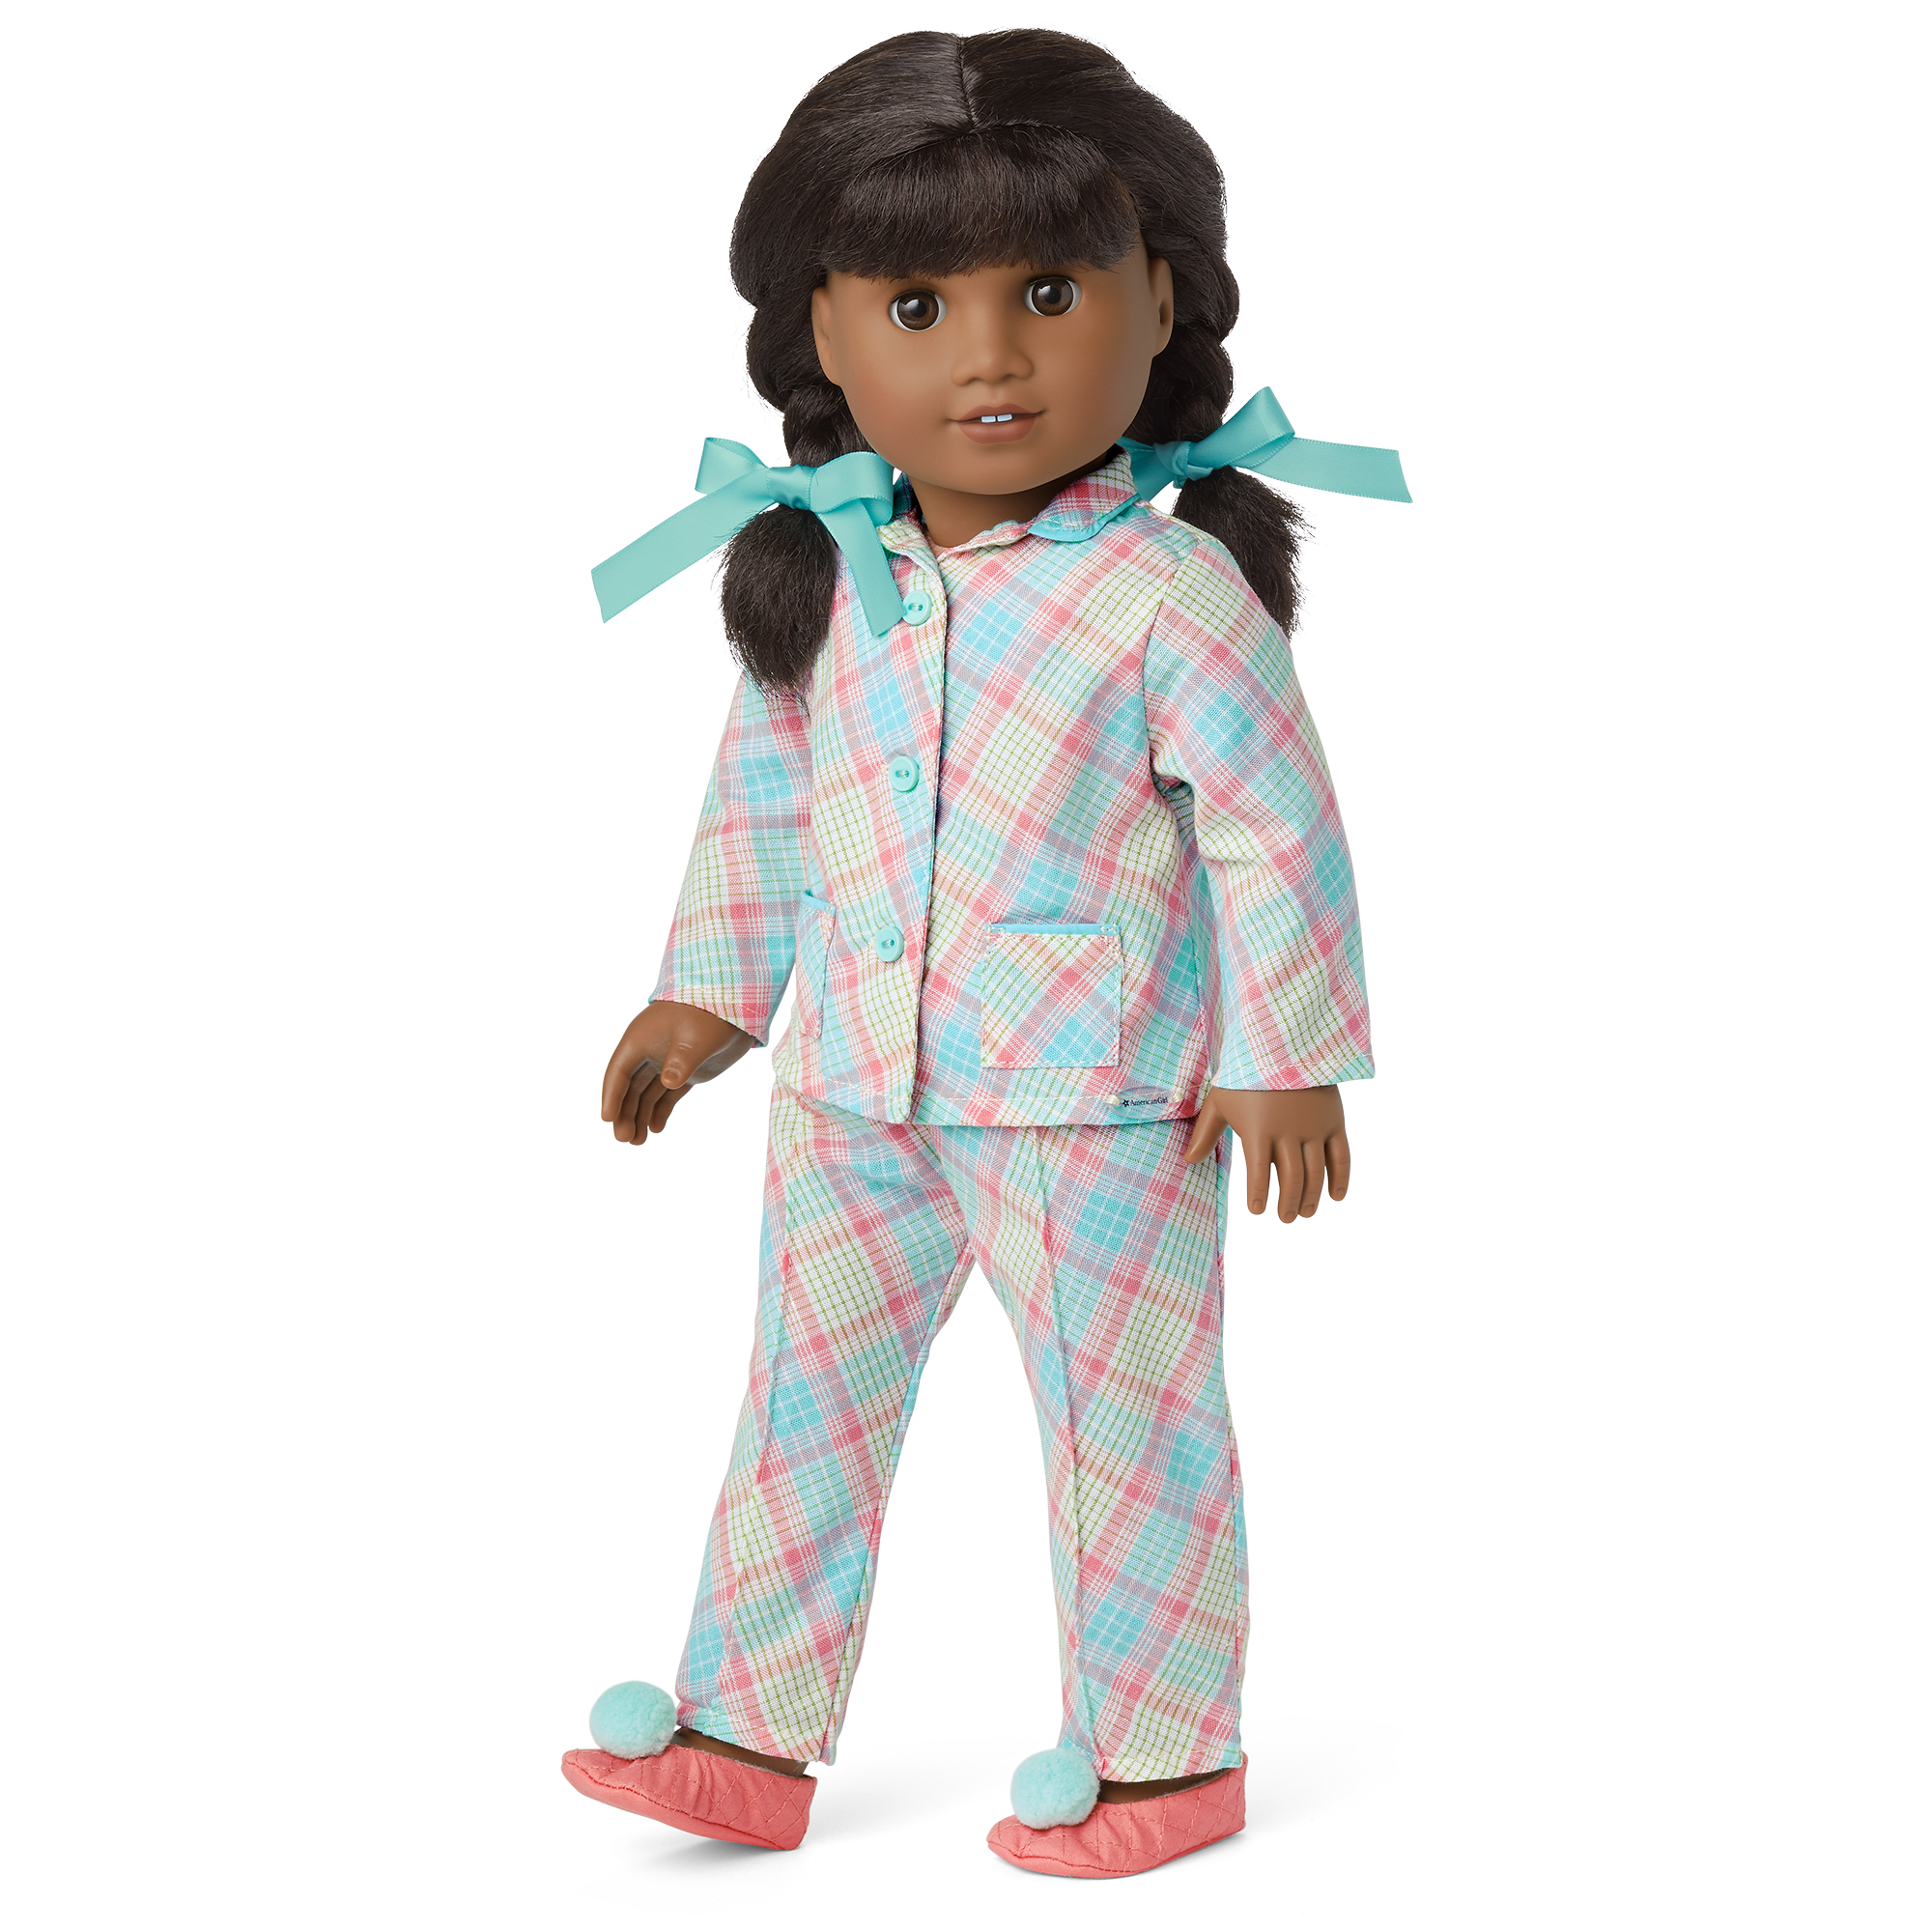 American Girl Doll McKenna's GIRL PAJAMAS for GIRLS size XS S M L or XL  mckenna